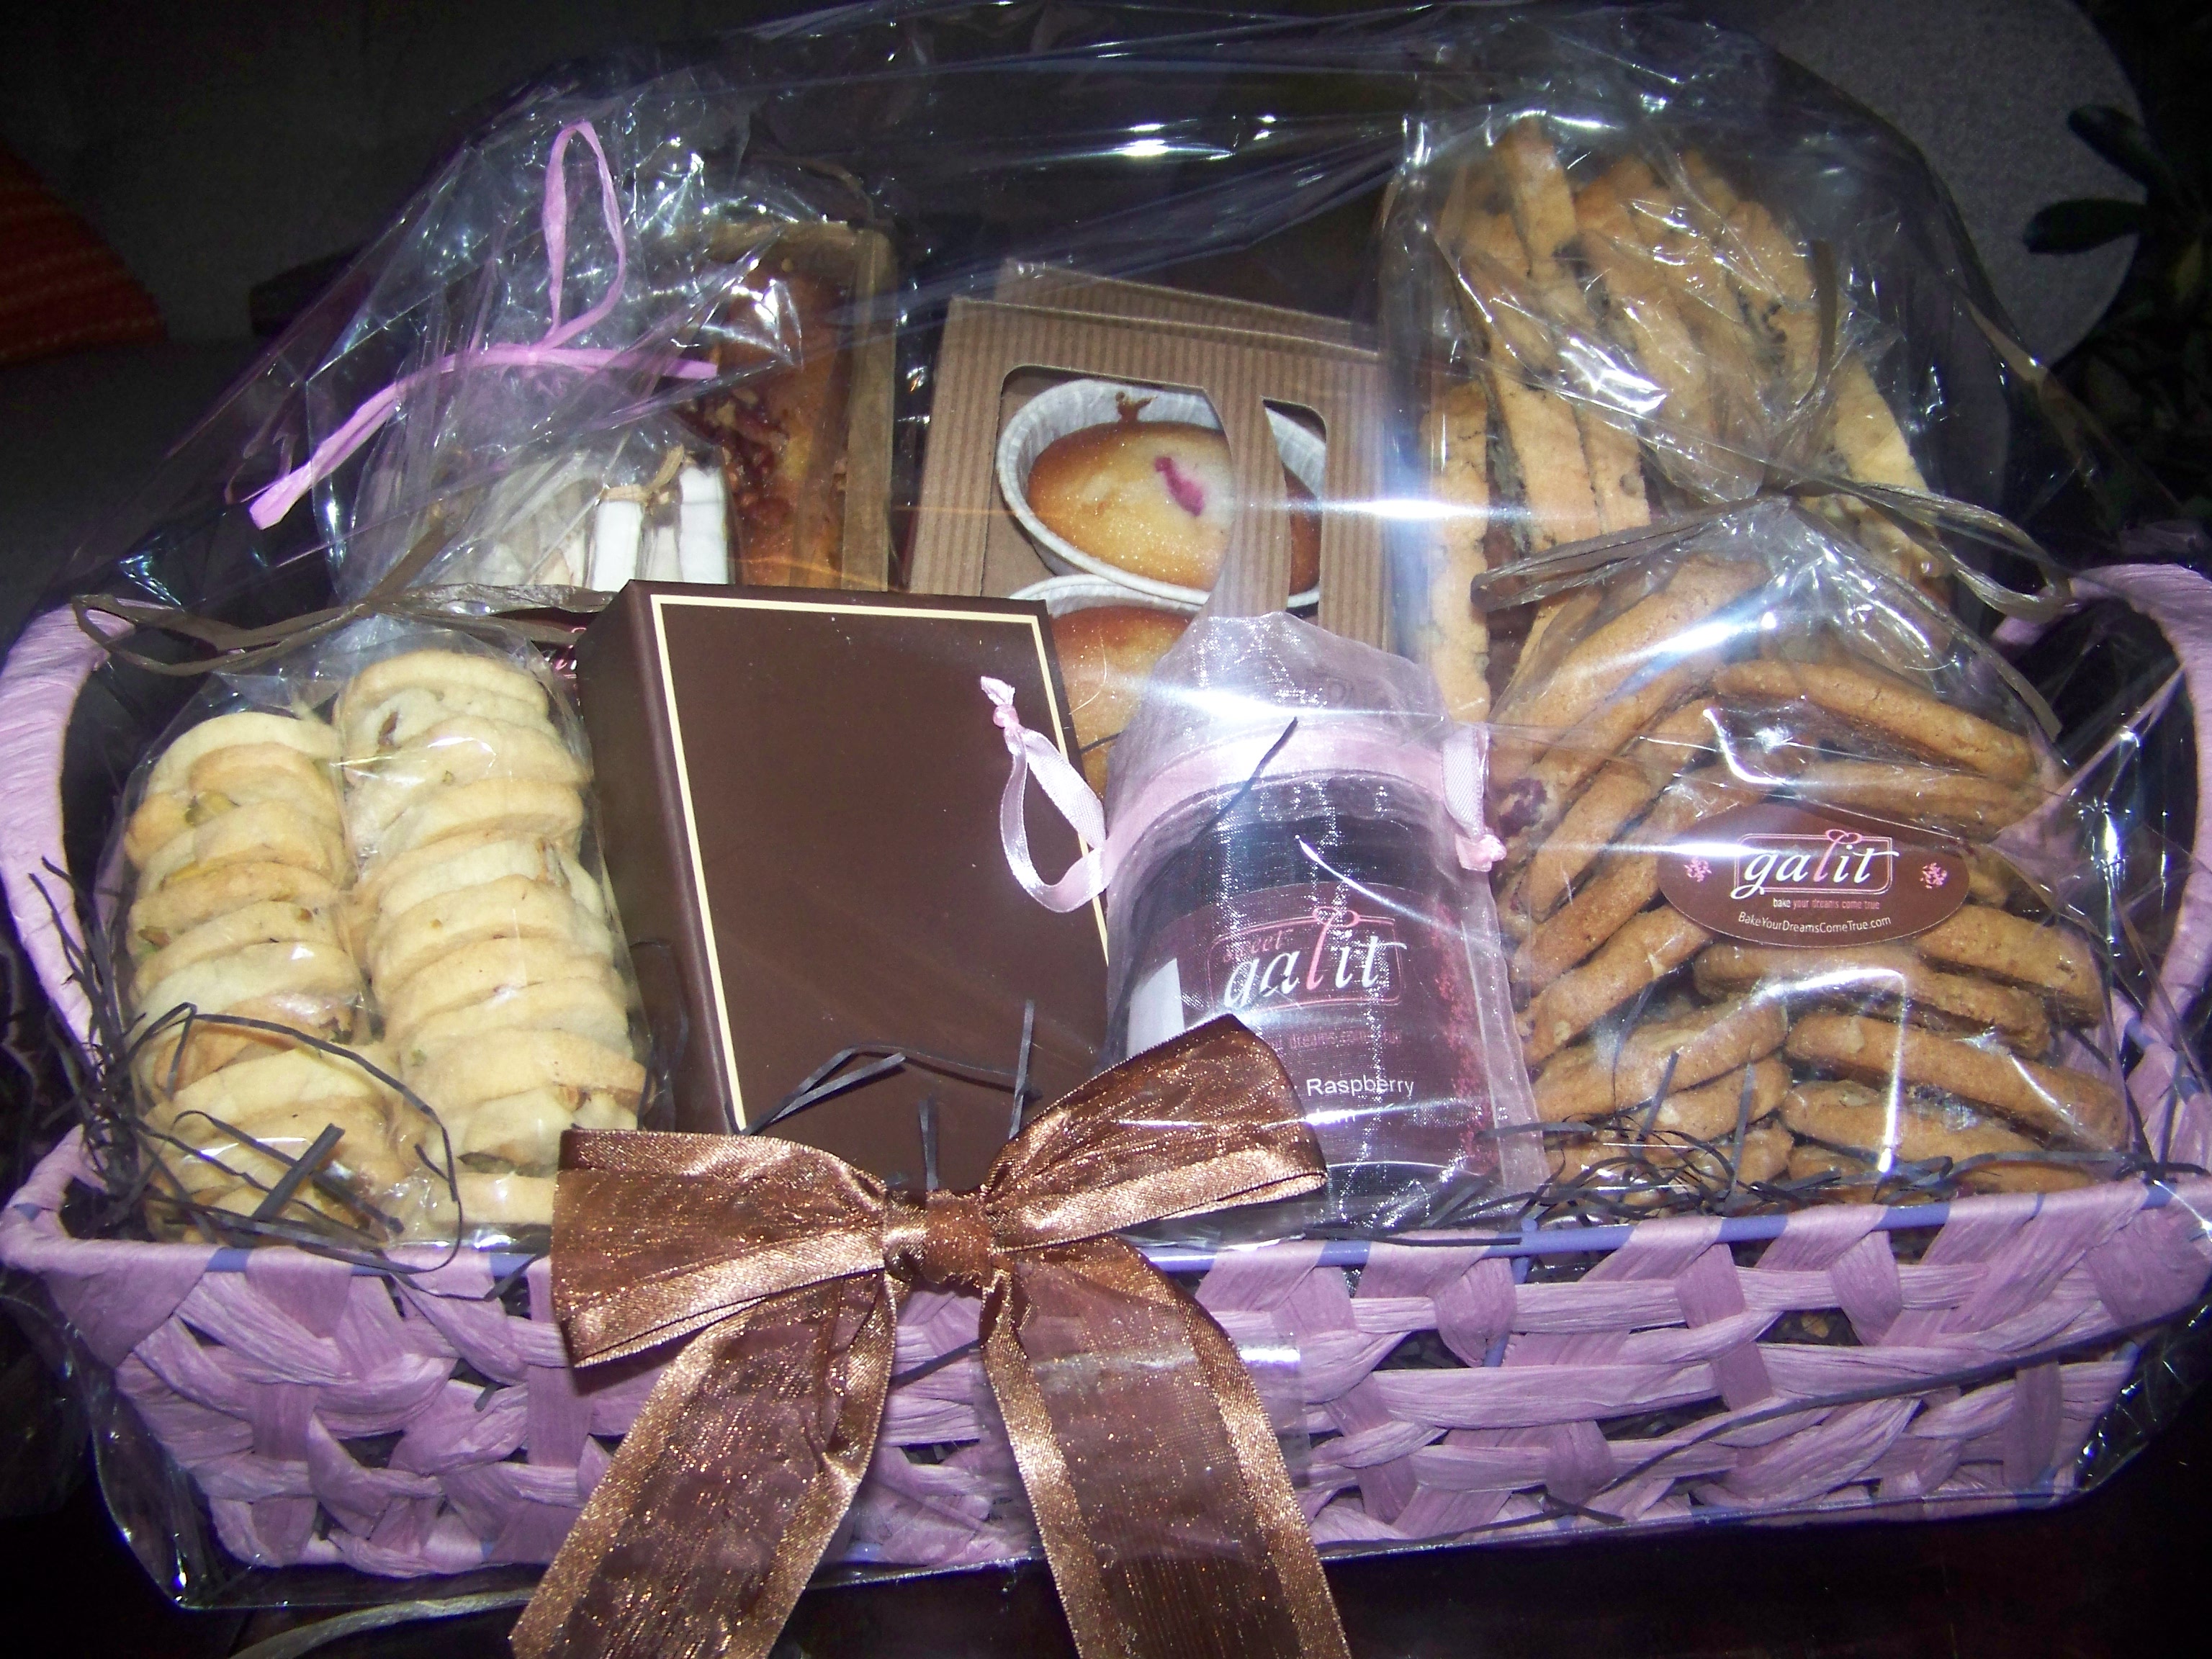 pastry gift baskets | Sweet Galit's Blog